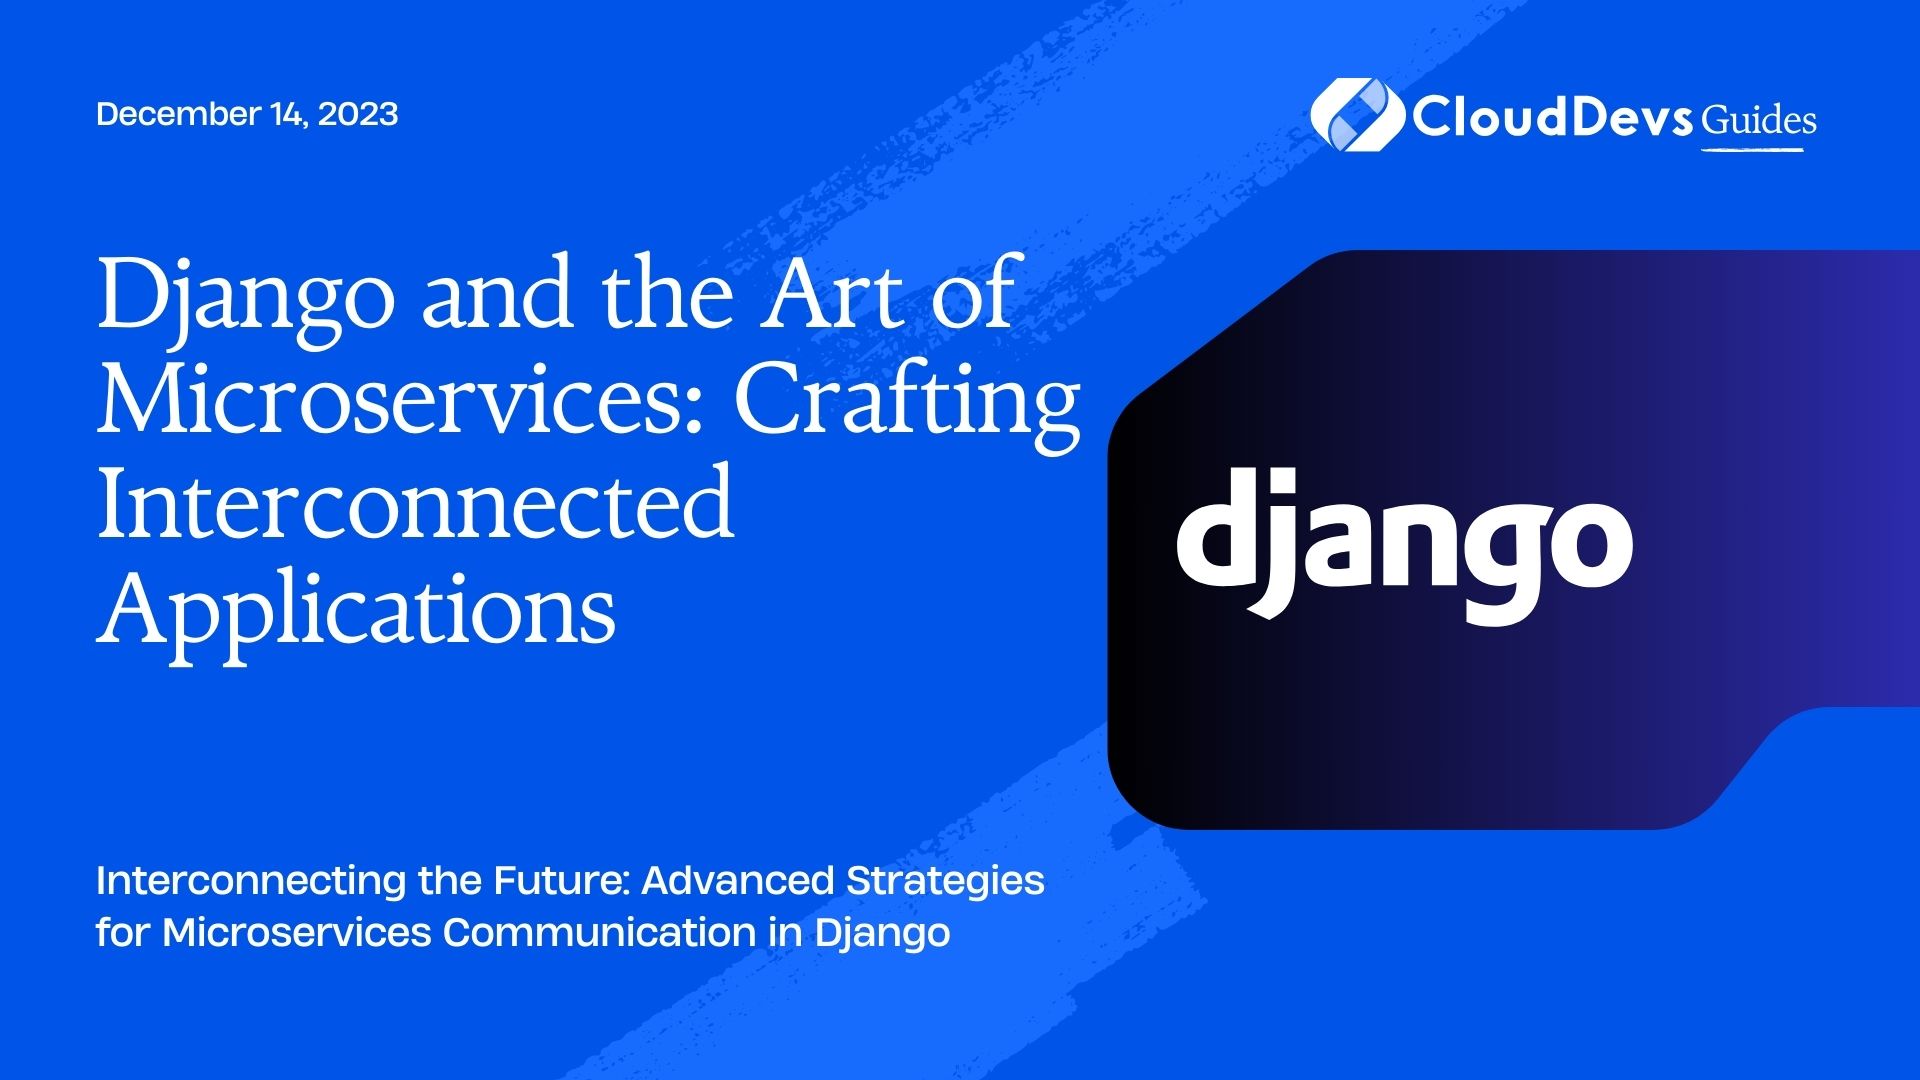 Django and the Art of Microservices: Crafting Interconnected Applications